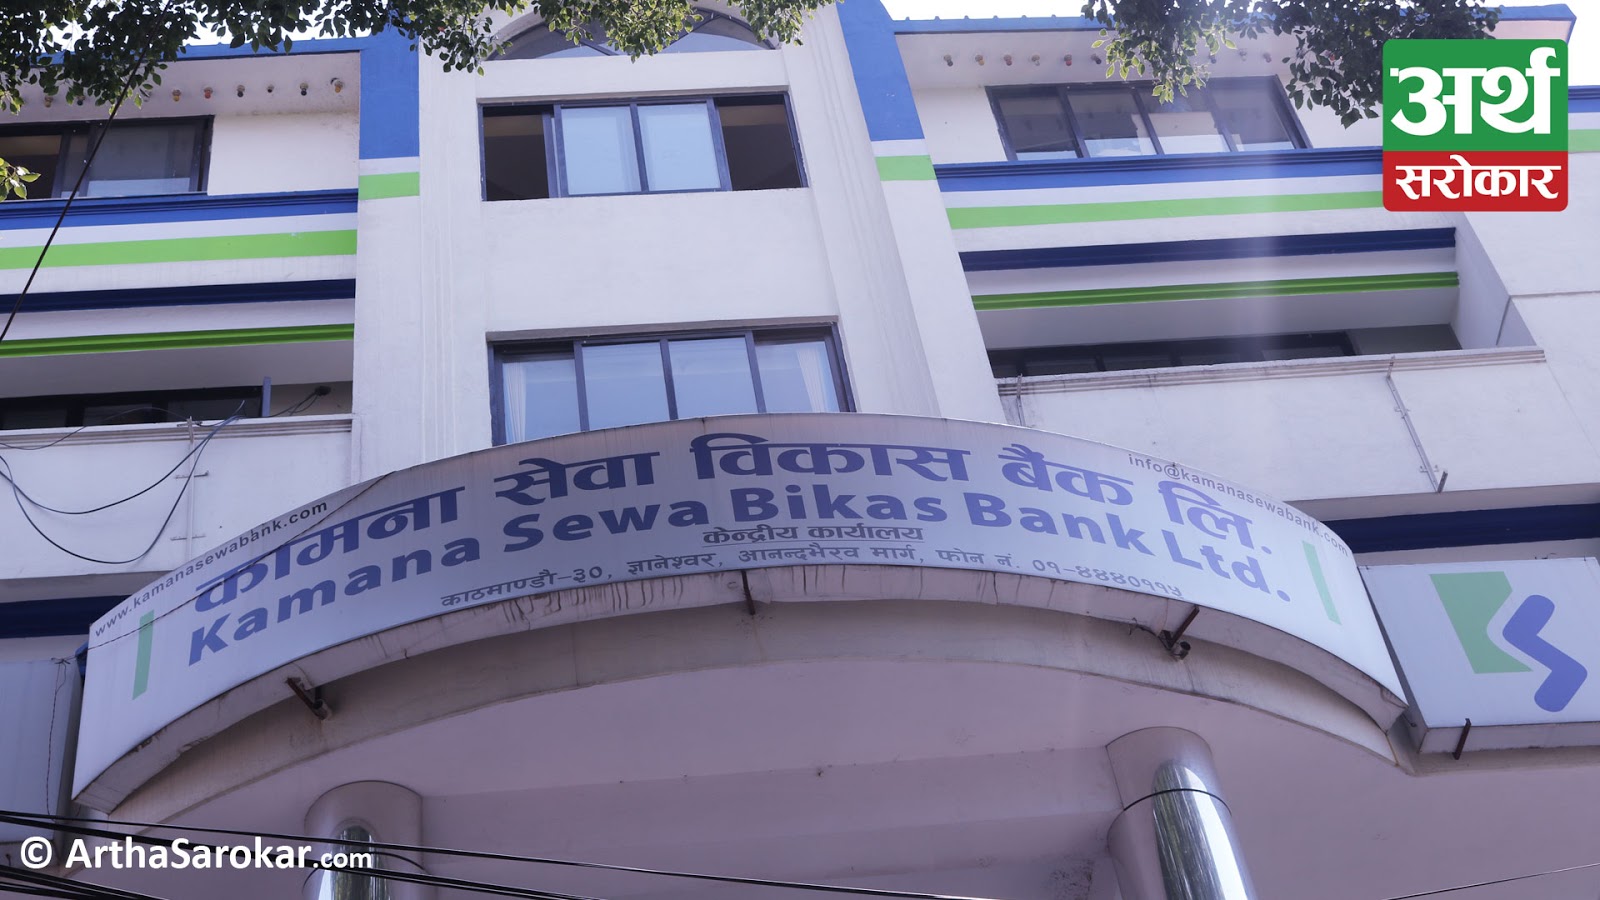 Kamana Sewa Customers to receive special discount on PCR test